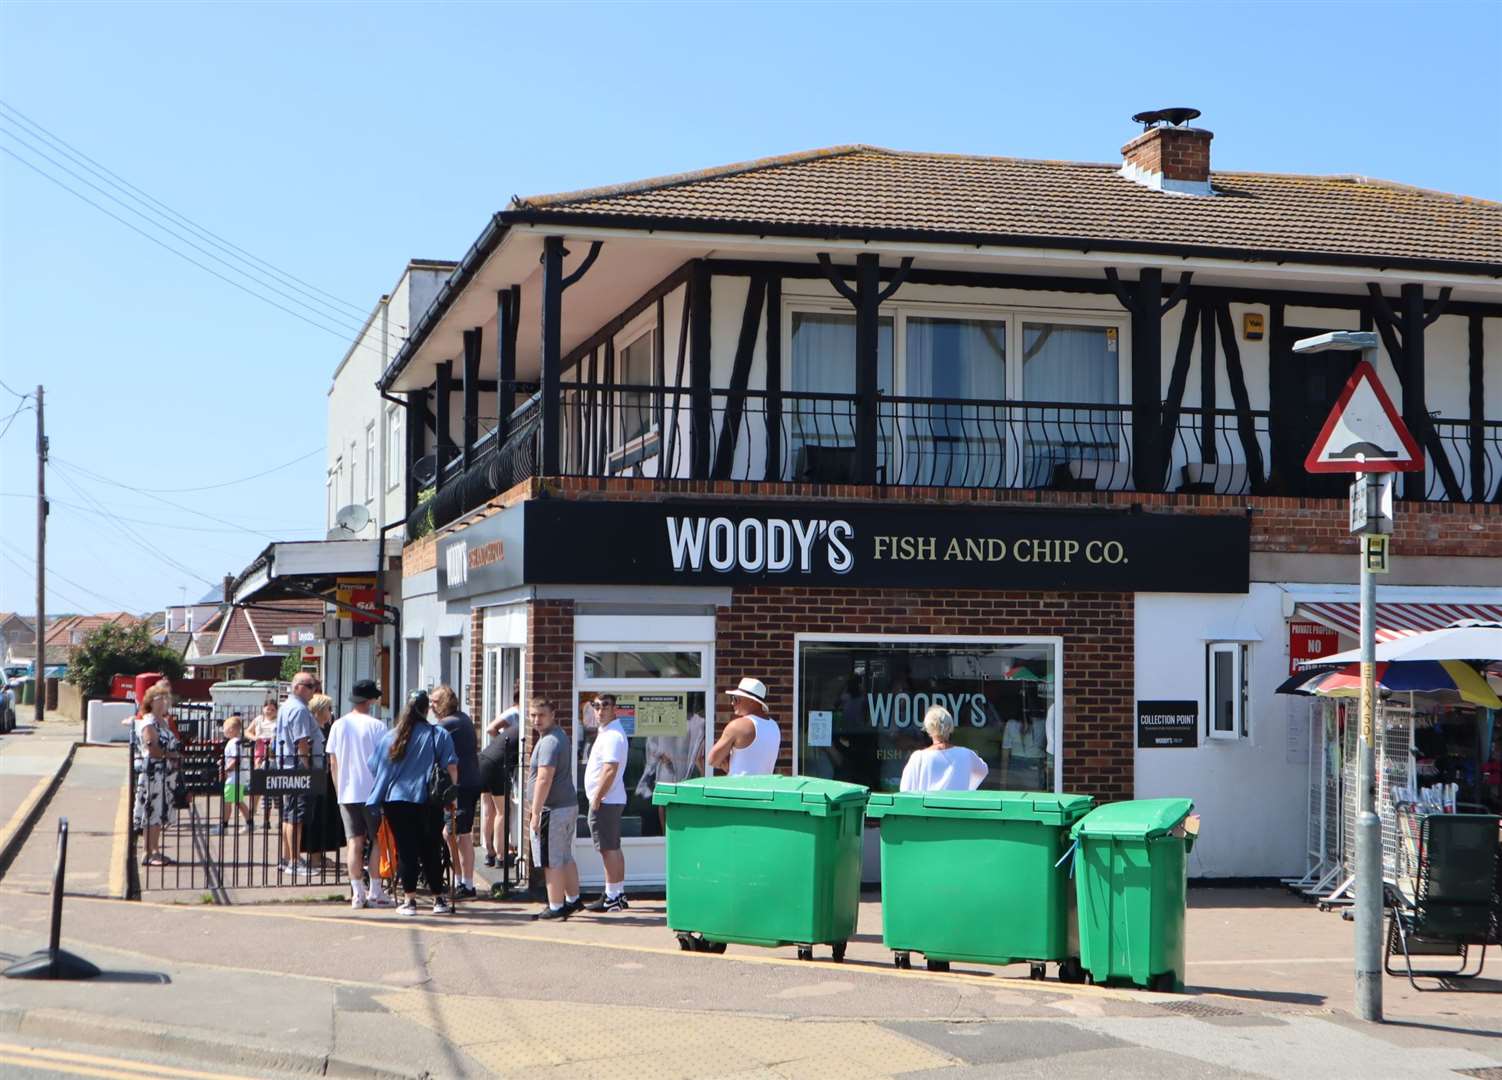 Woody's Fish and Chip Co in Leysdown. Picture: John Nurden